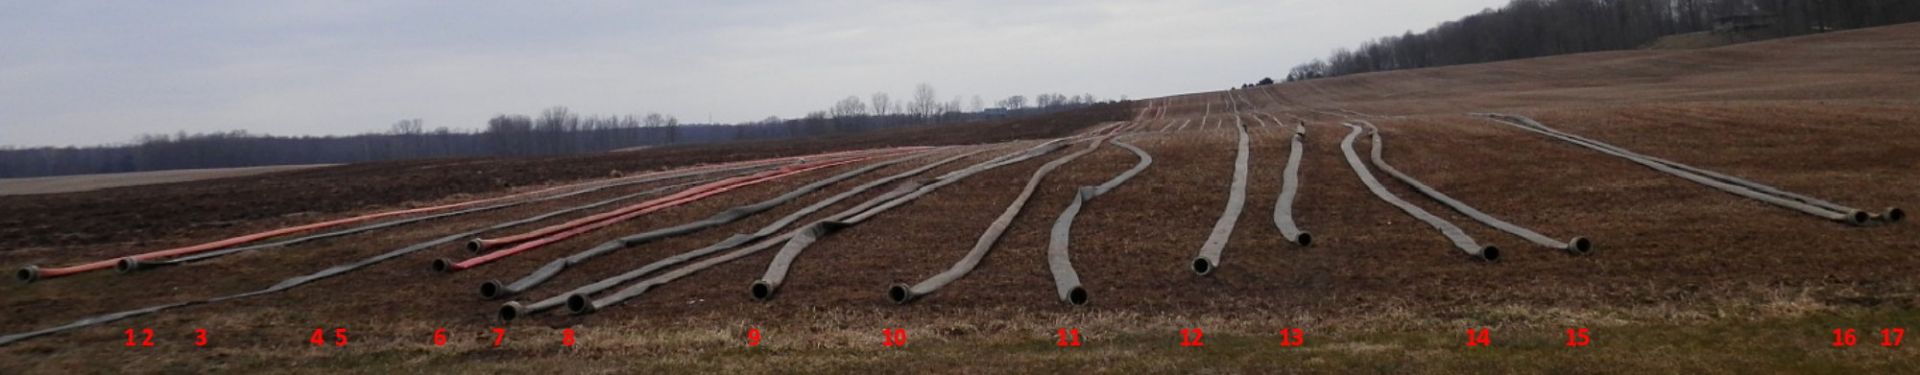 MANURE IRRIGATION HOSE-LAY HOSE, 517 Ft. (Sold by the foot x 517)